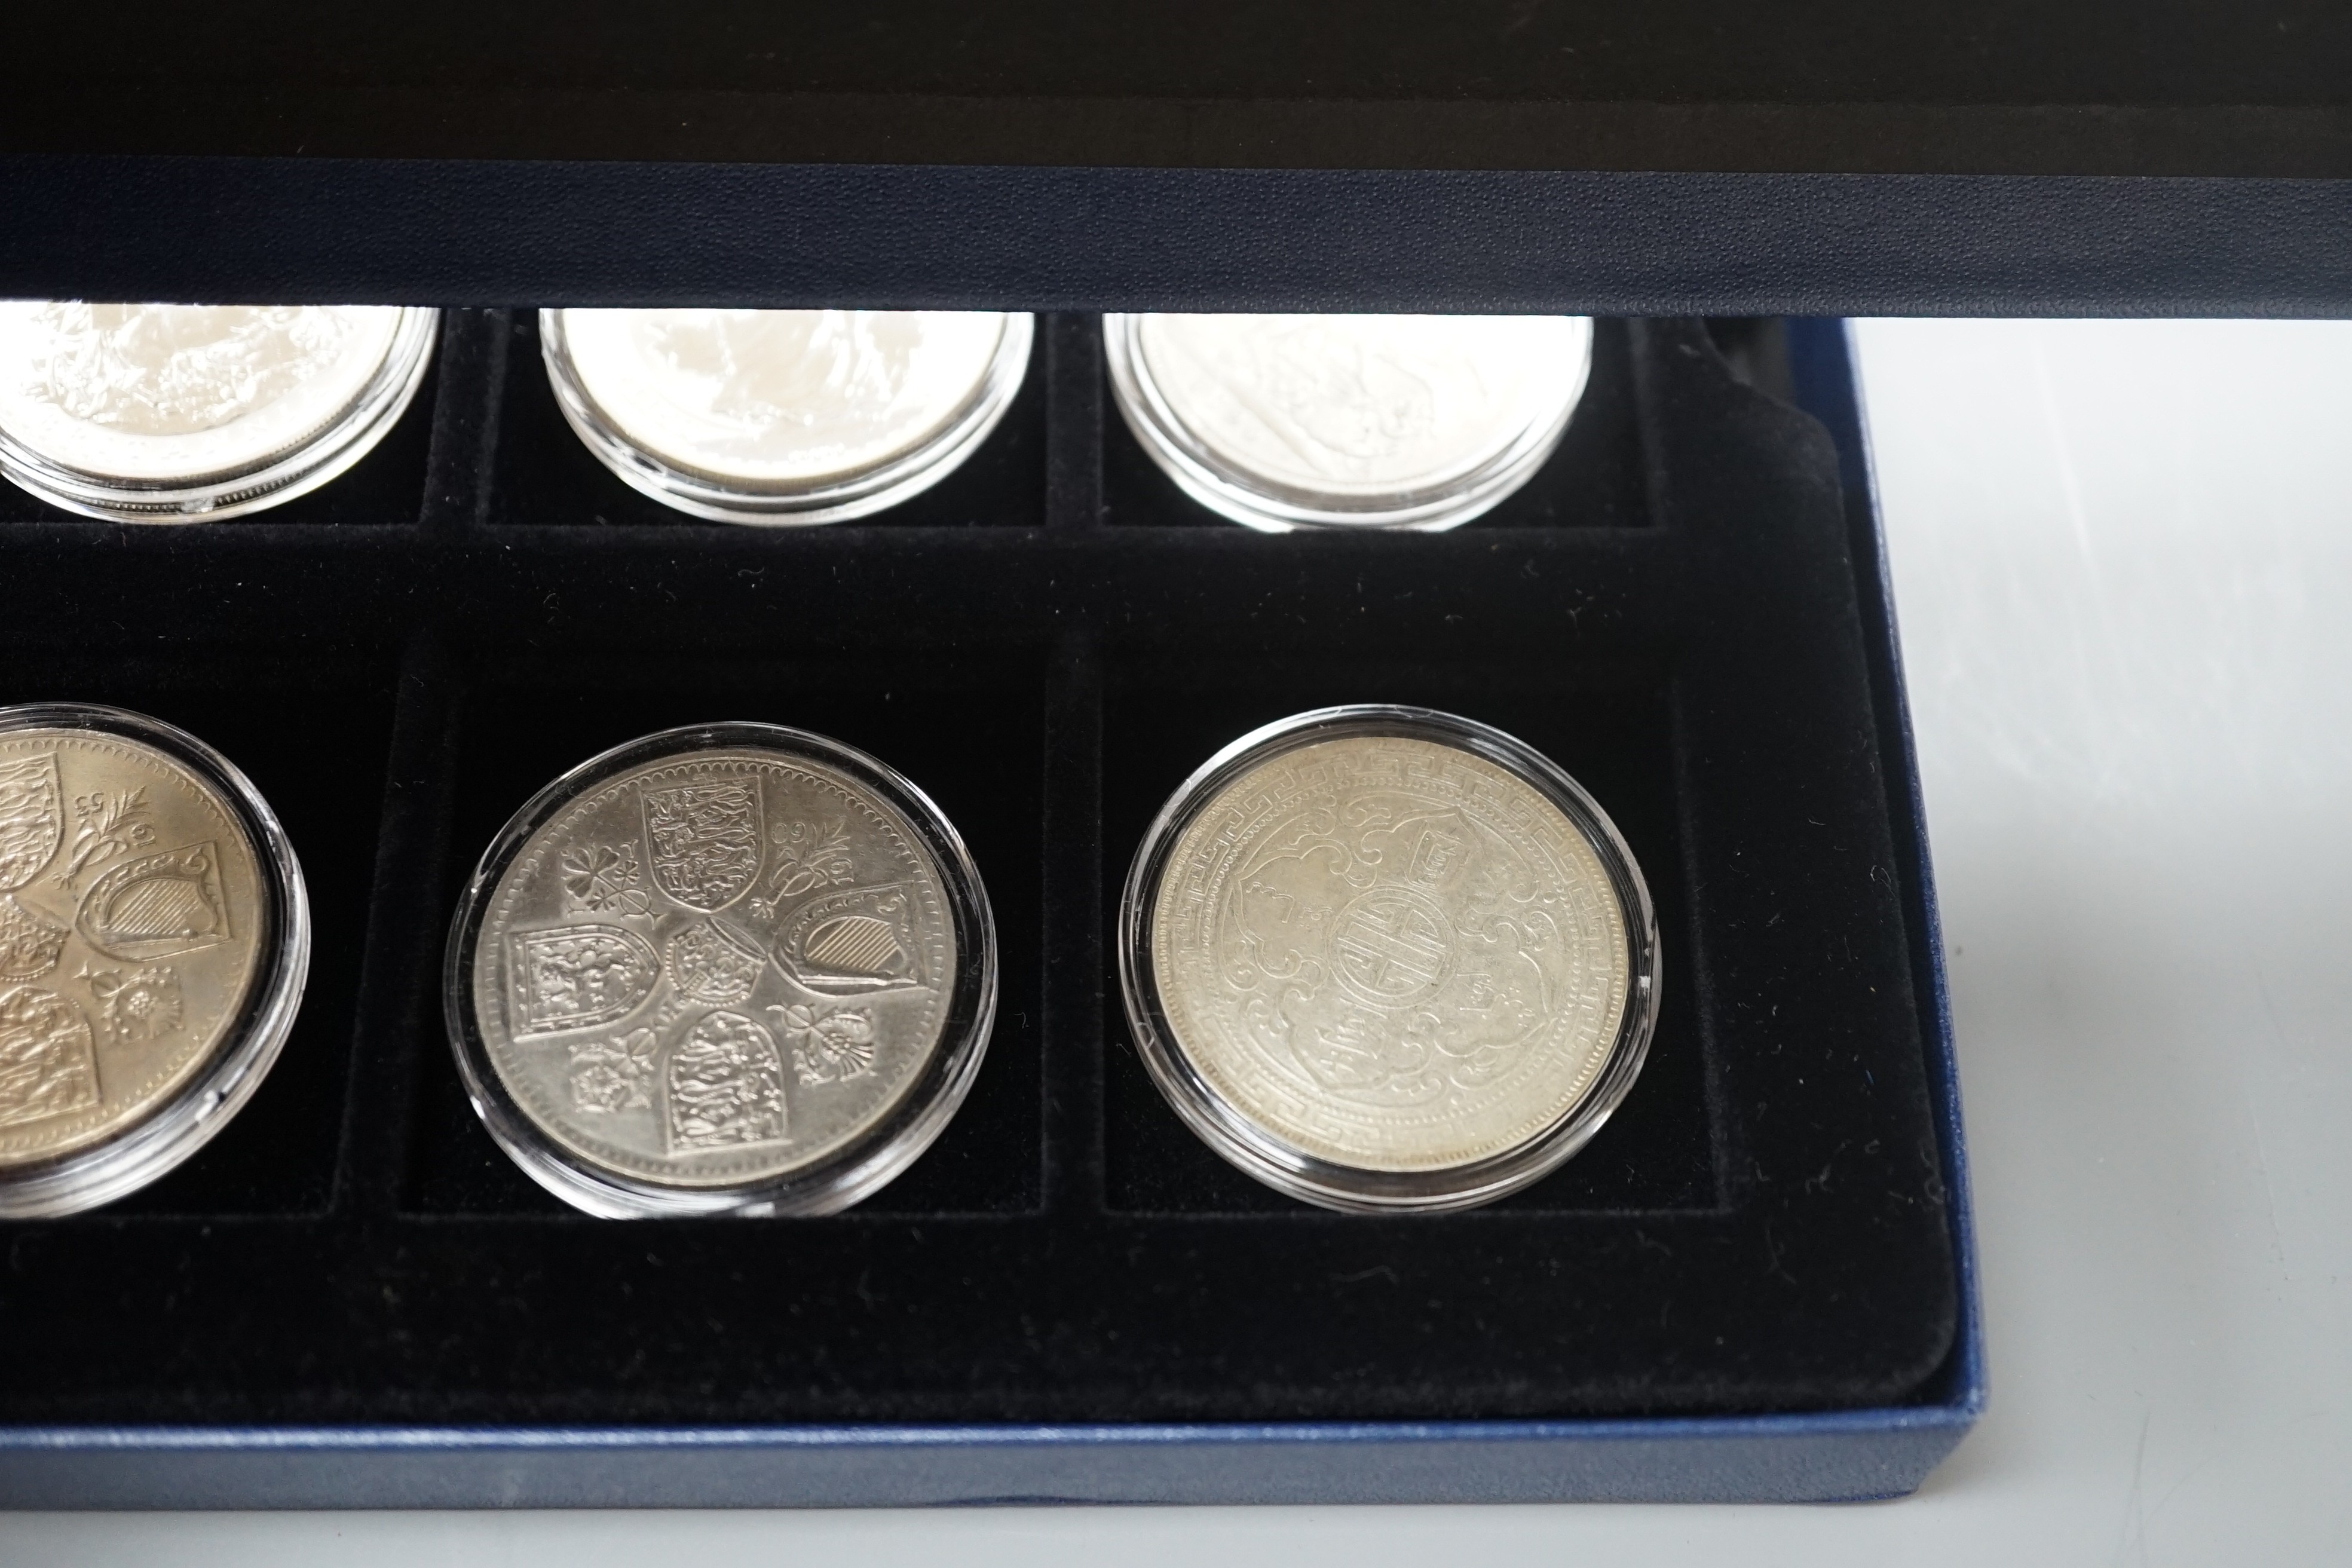 A group of coins including 1898 British Trade One Dollar, Royal Mint UK two QEII five shillings, 1935 crown, 1890 crown, silver proof coins - five 1oz. silver Britannia £2 coins 1998-2000, 2003, 2004, 2002 Queen Mother £